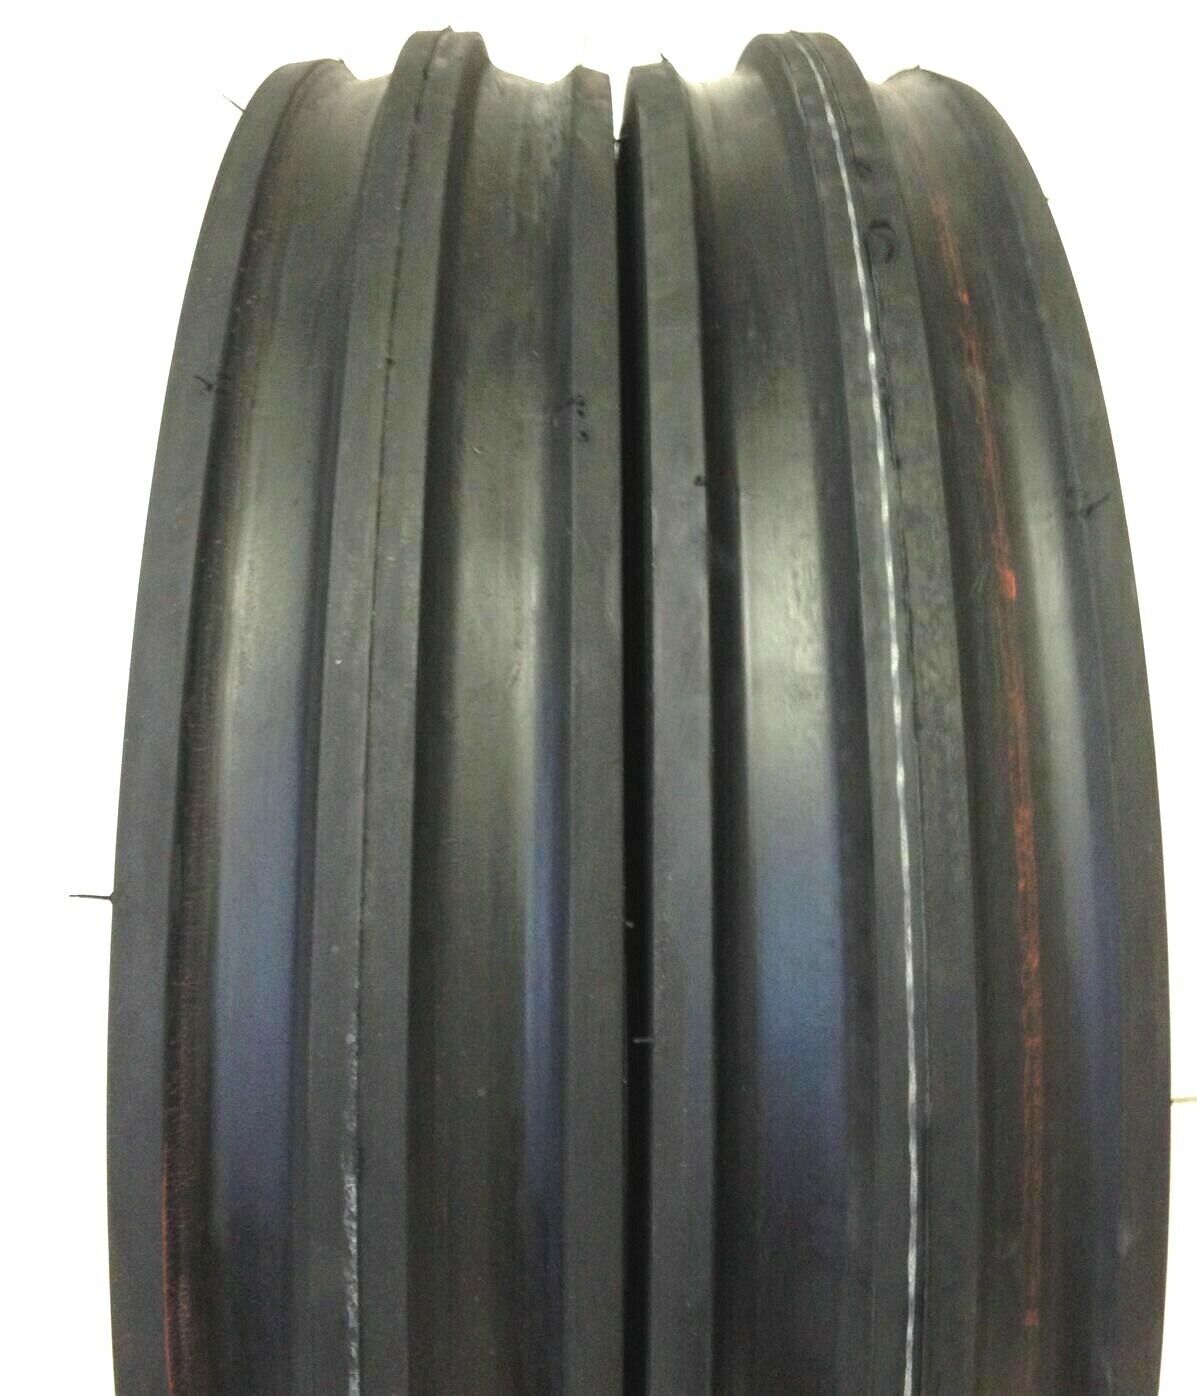 Two Tires 4.00-12 K9 3 Rib Tractor Front F2 4 Ply Tubeless 4.00x12 400-12 Tires